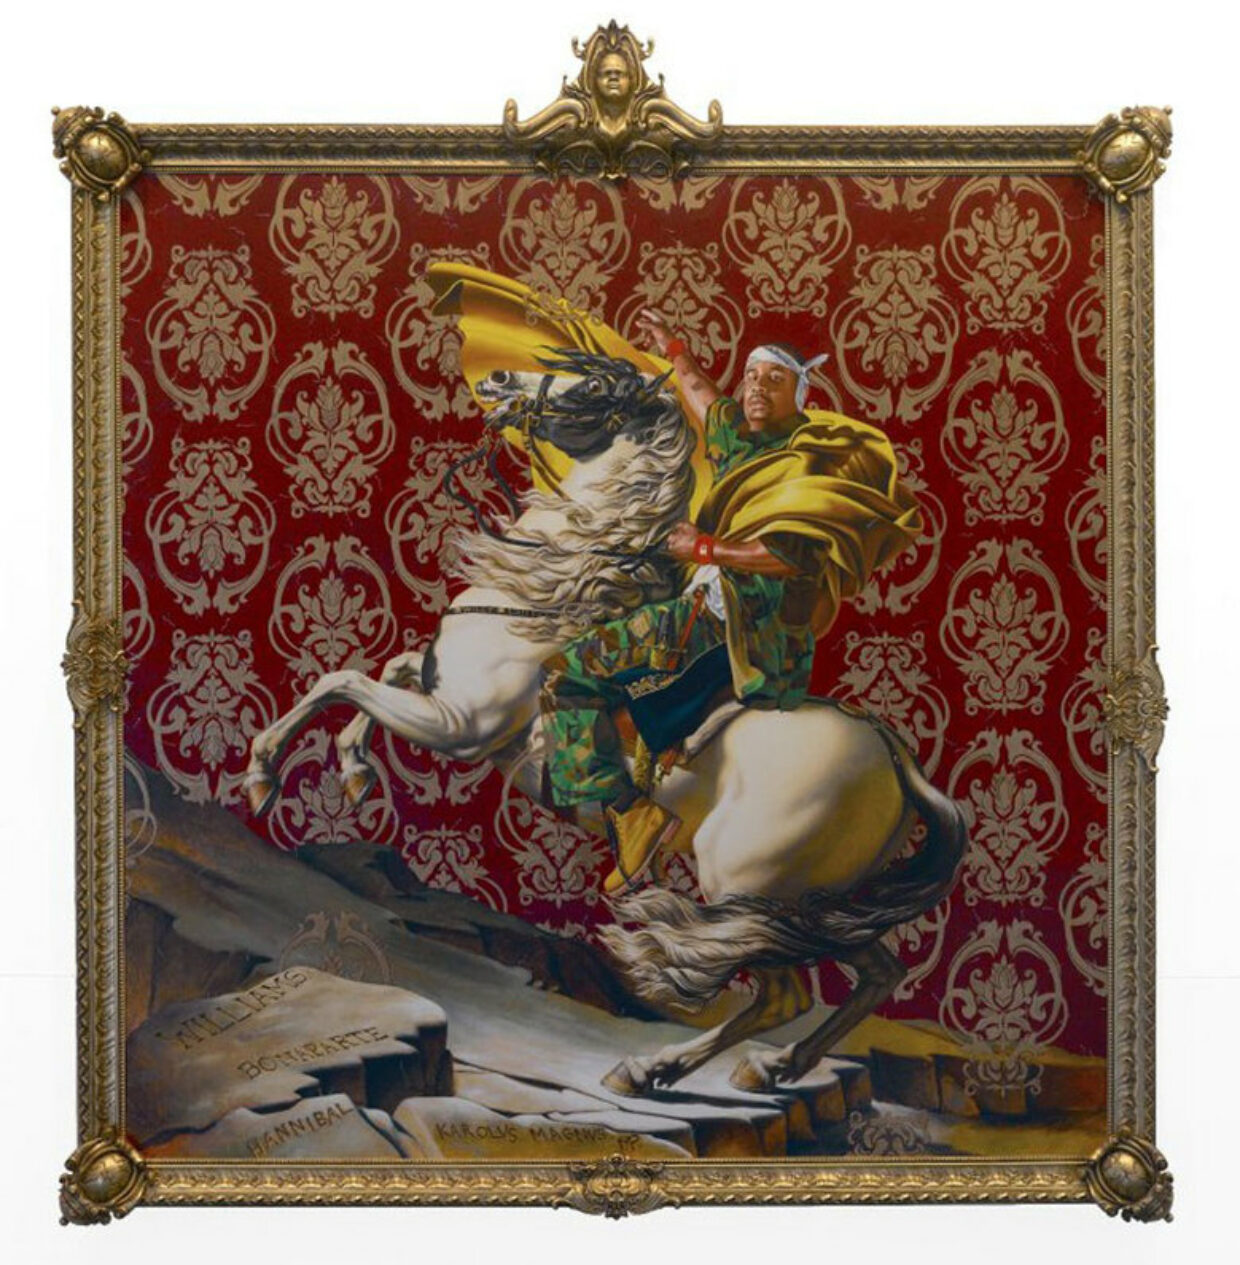 “Kehinde Wiley – A New Republic” exhibition opens Saturday at VMFA | 1